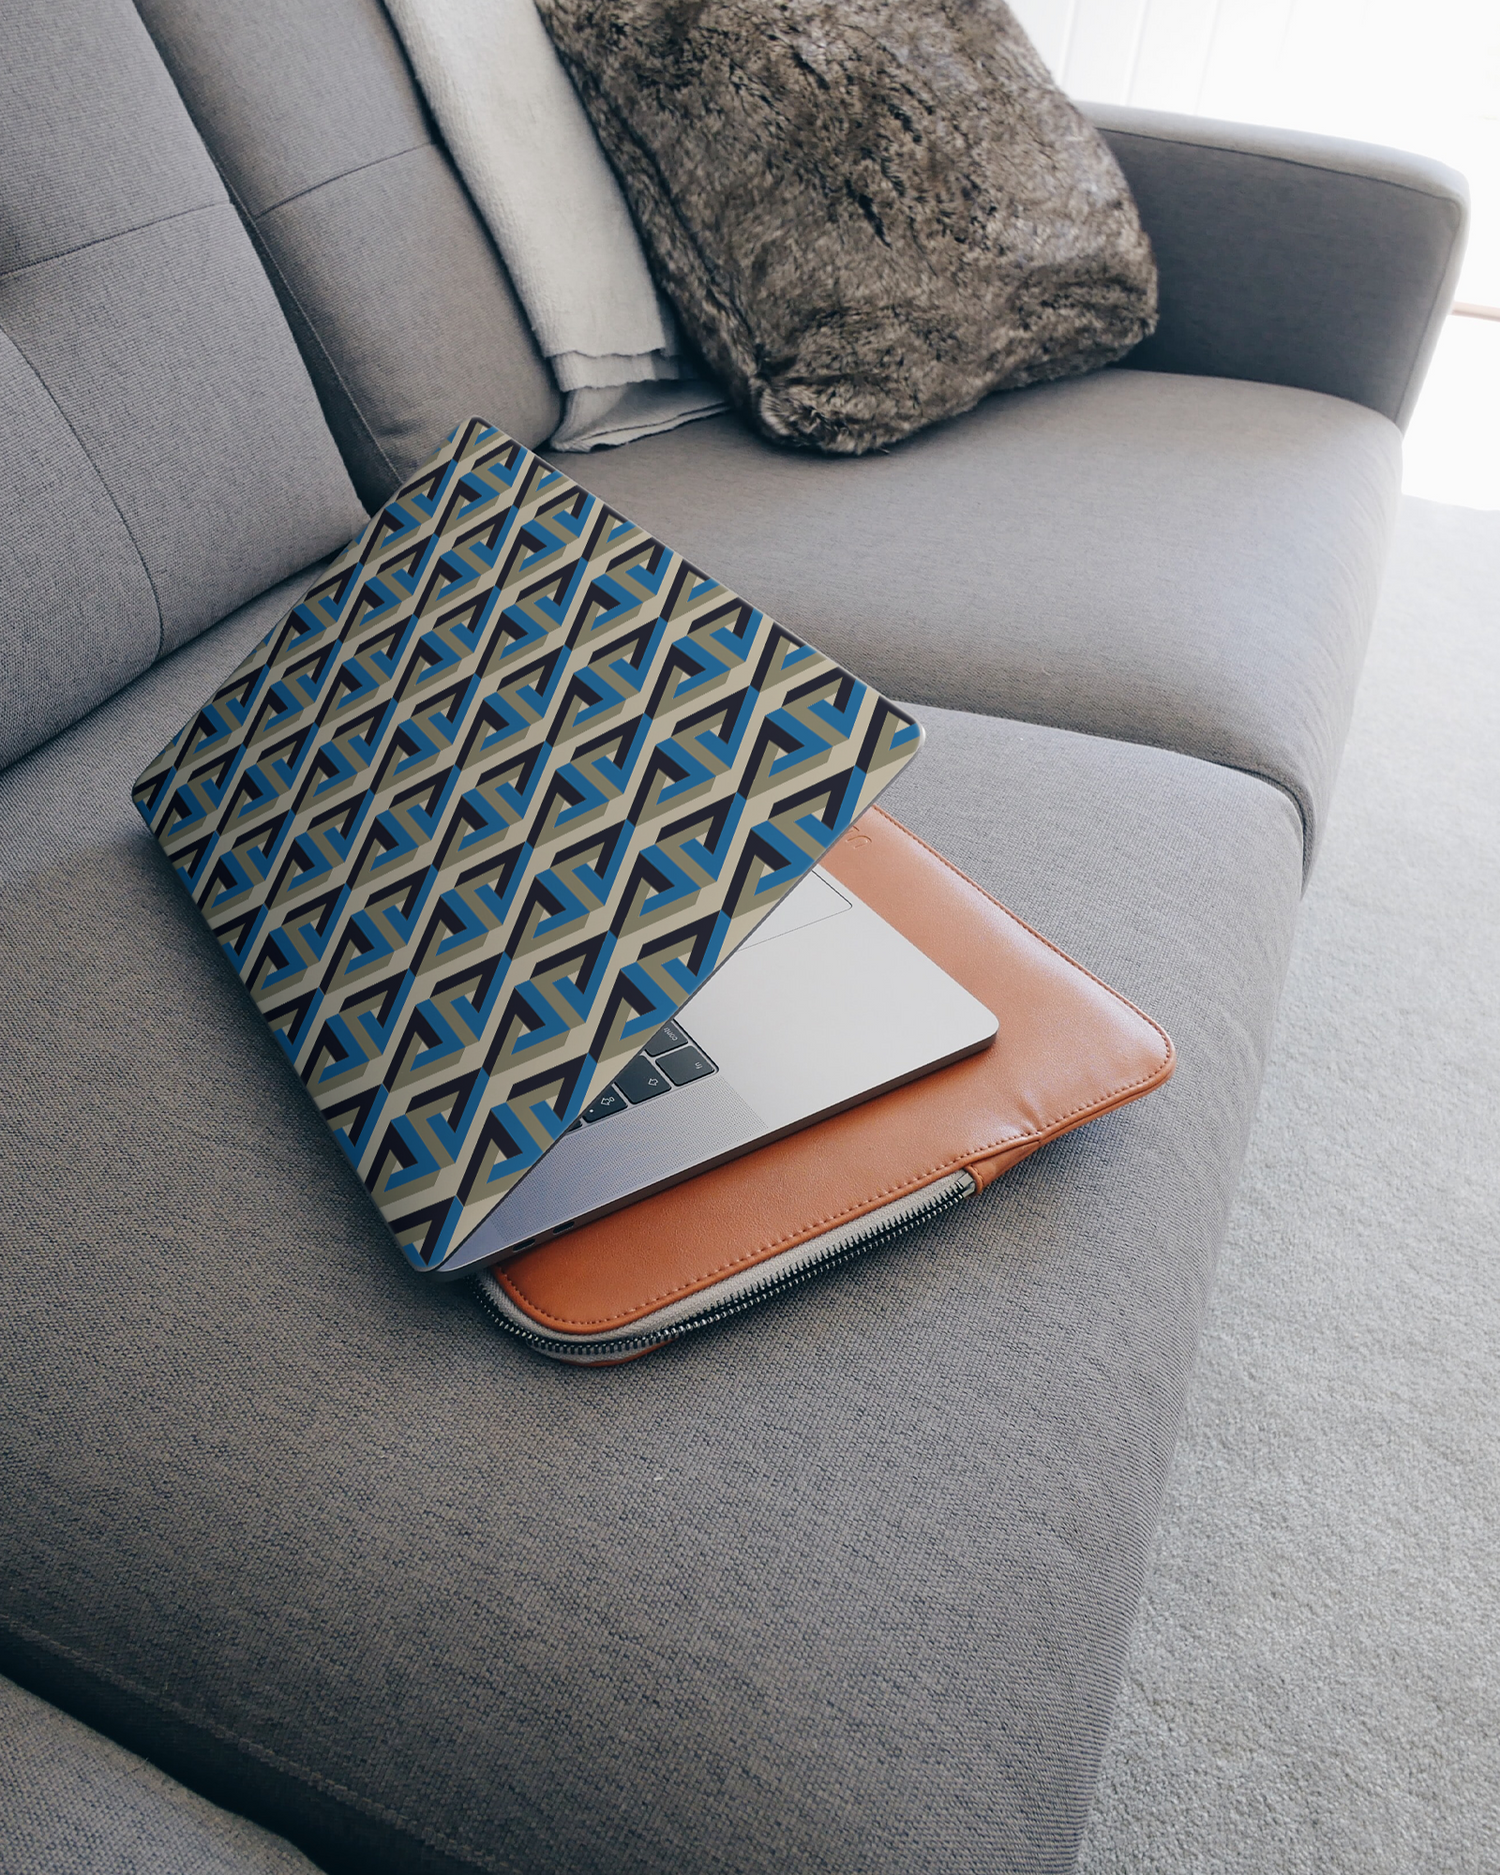 Penrose Pattern Laptop Skin for 15 inch Apple MacBooks on a couch